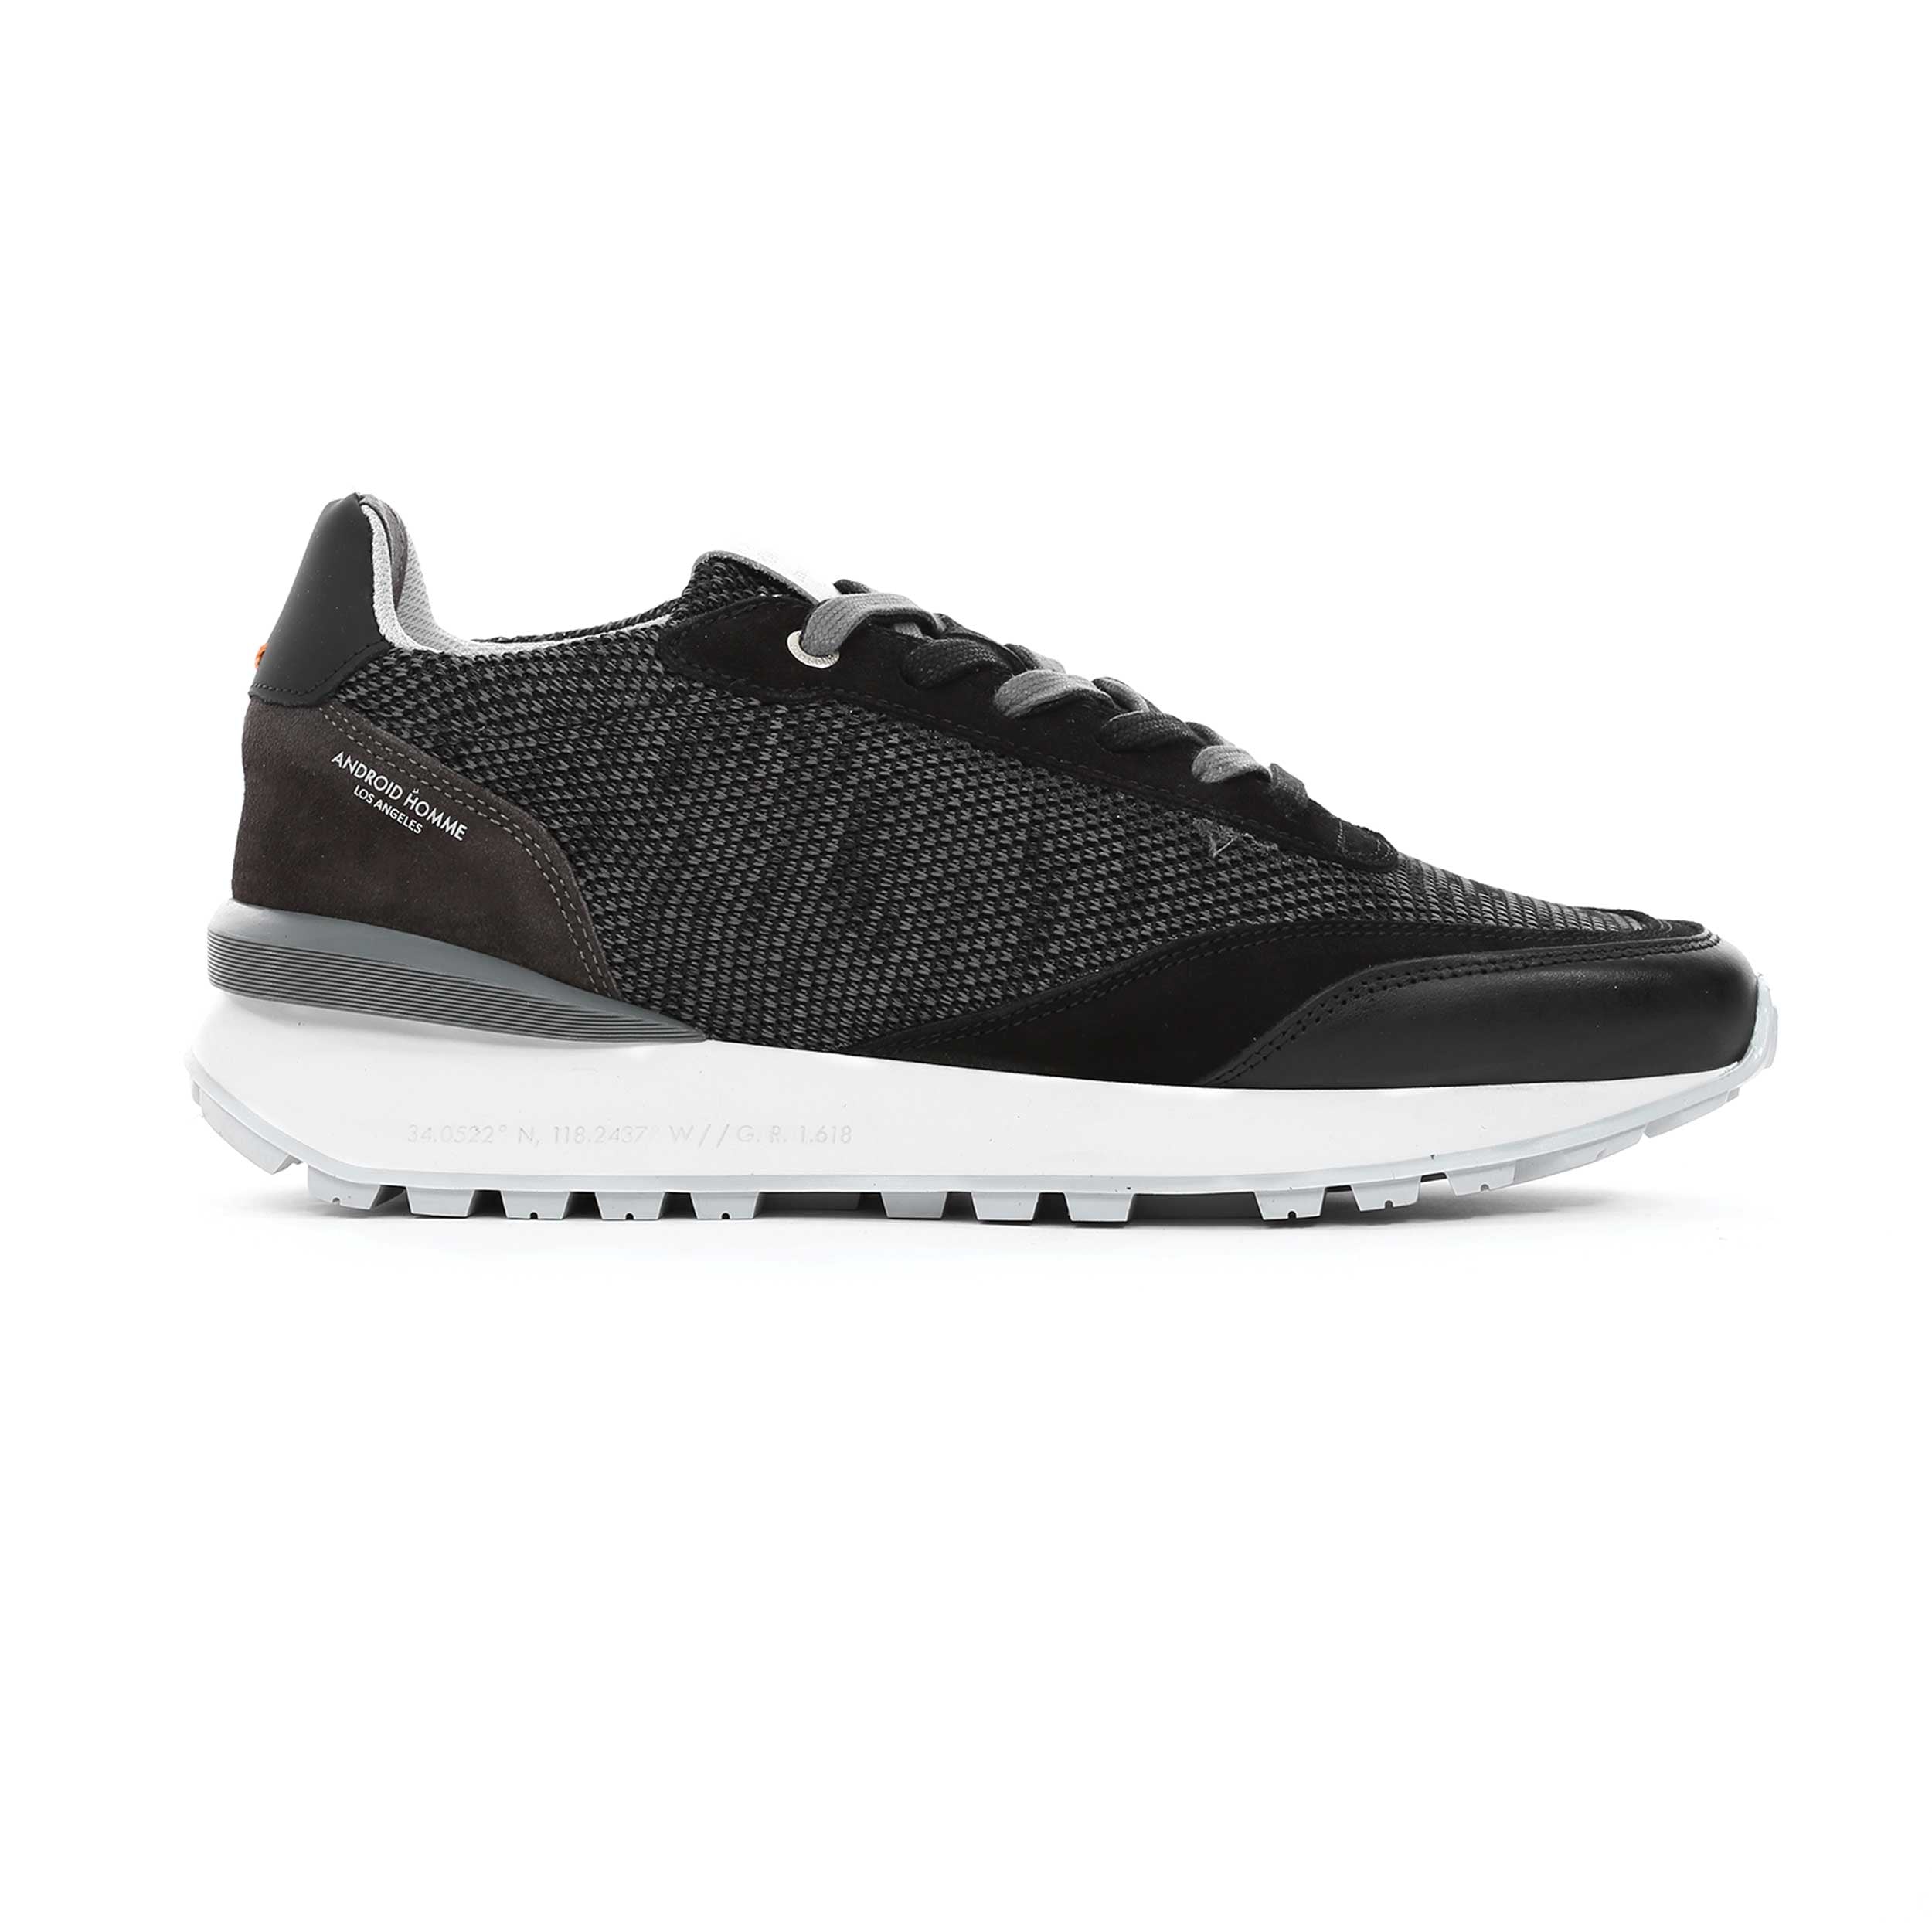 Android Homme Marina Del Ray Trainer in Black Grey Knit